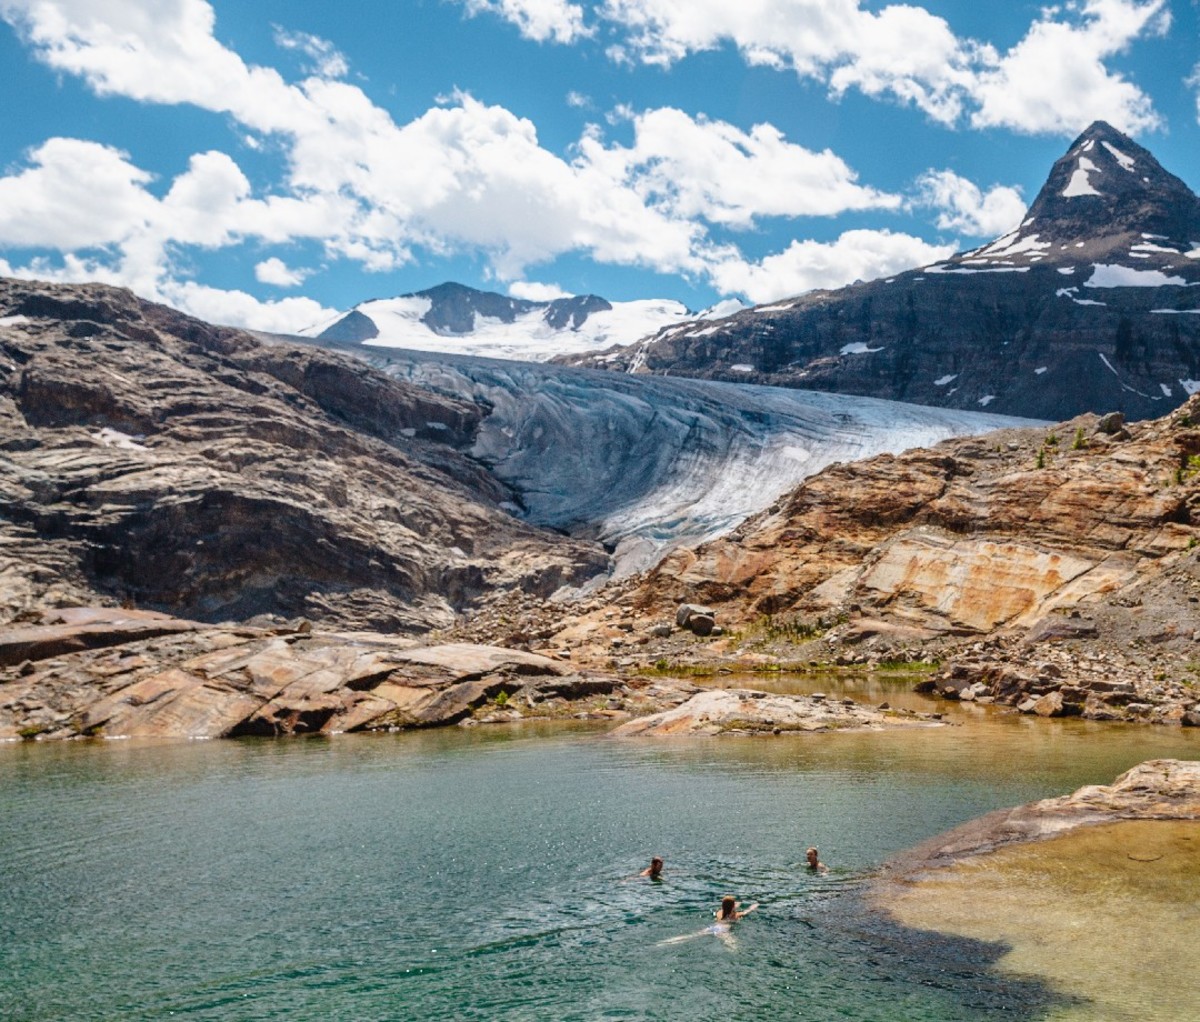 Three summer hikers swim in an alpine lake in the Canadian mountains